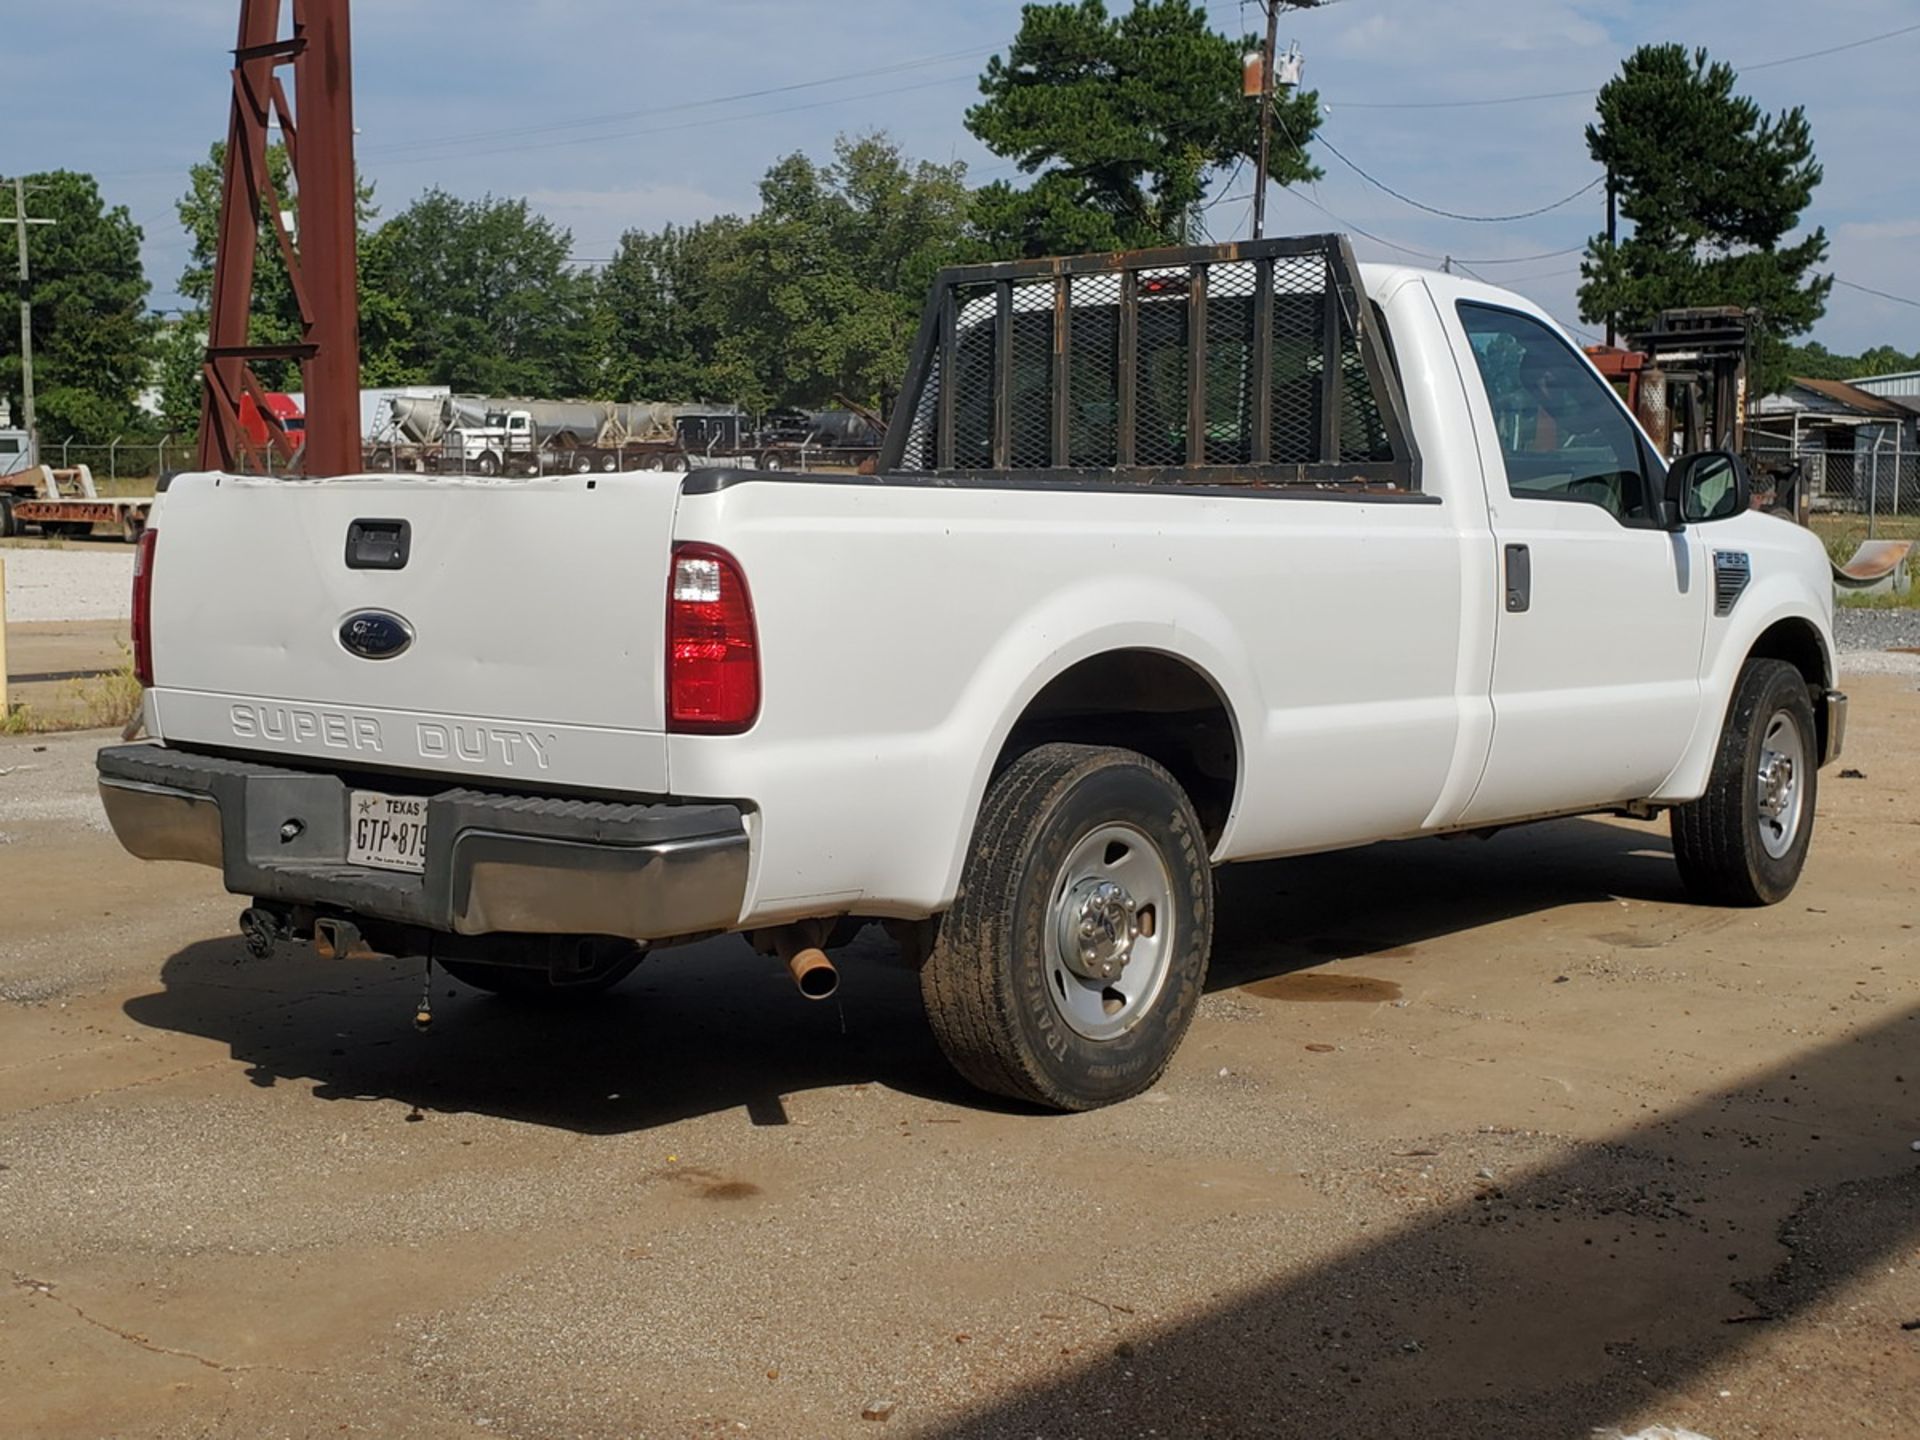 2008 Ford F-250 Pickup V8 Engine, Vin: 1FTN20518ED94781, 95,506 Mileage, Plate: TX GTP-8796 - Image 4 of 16